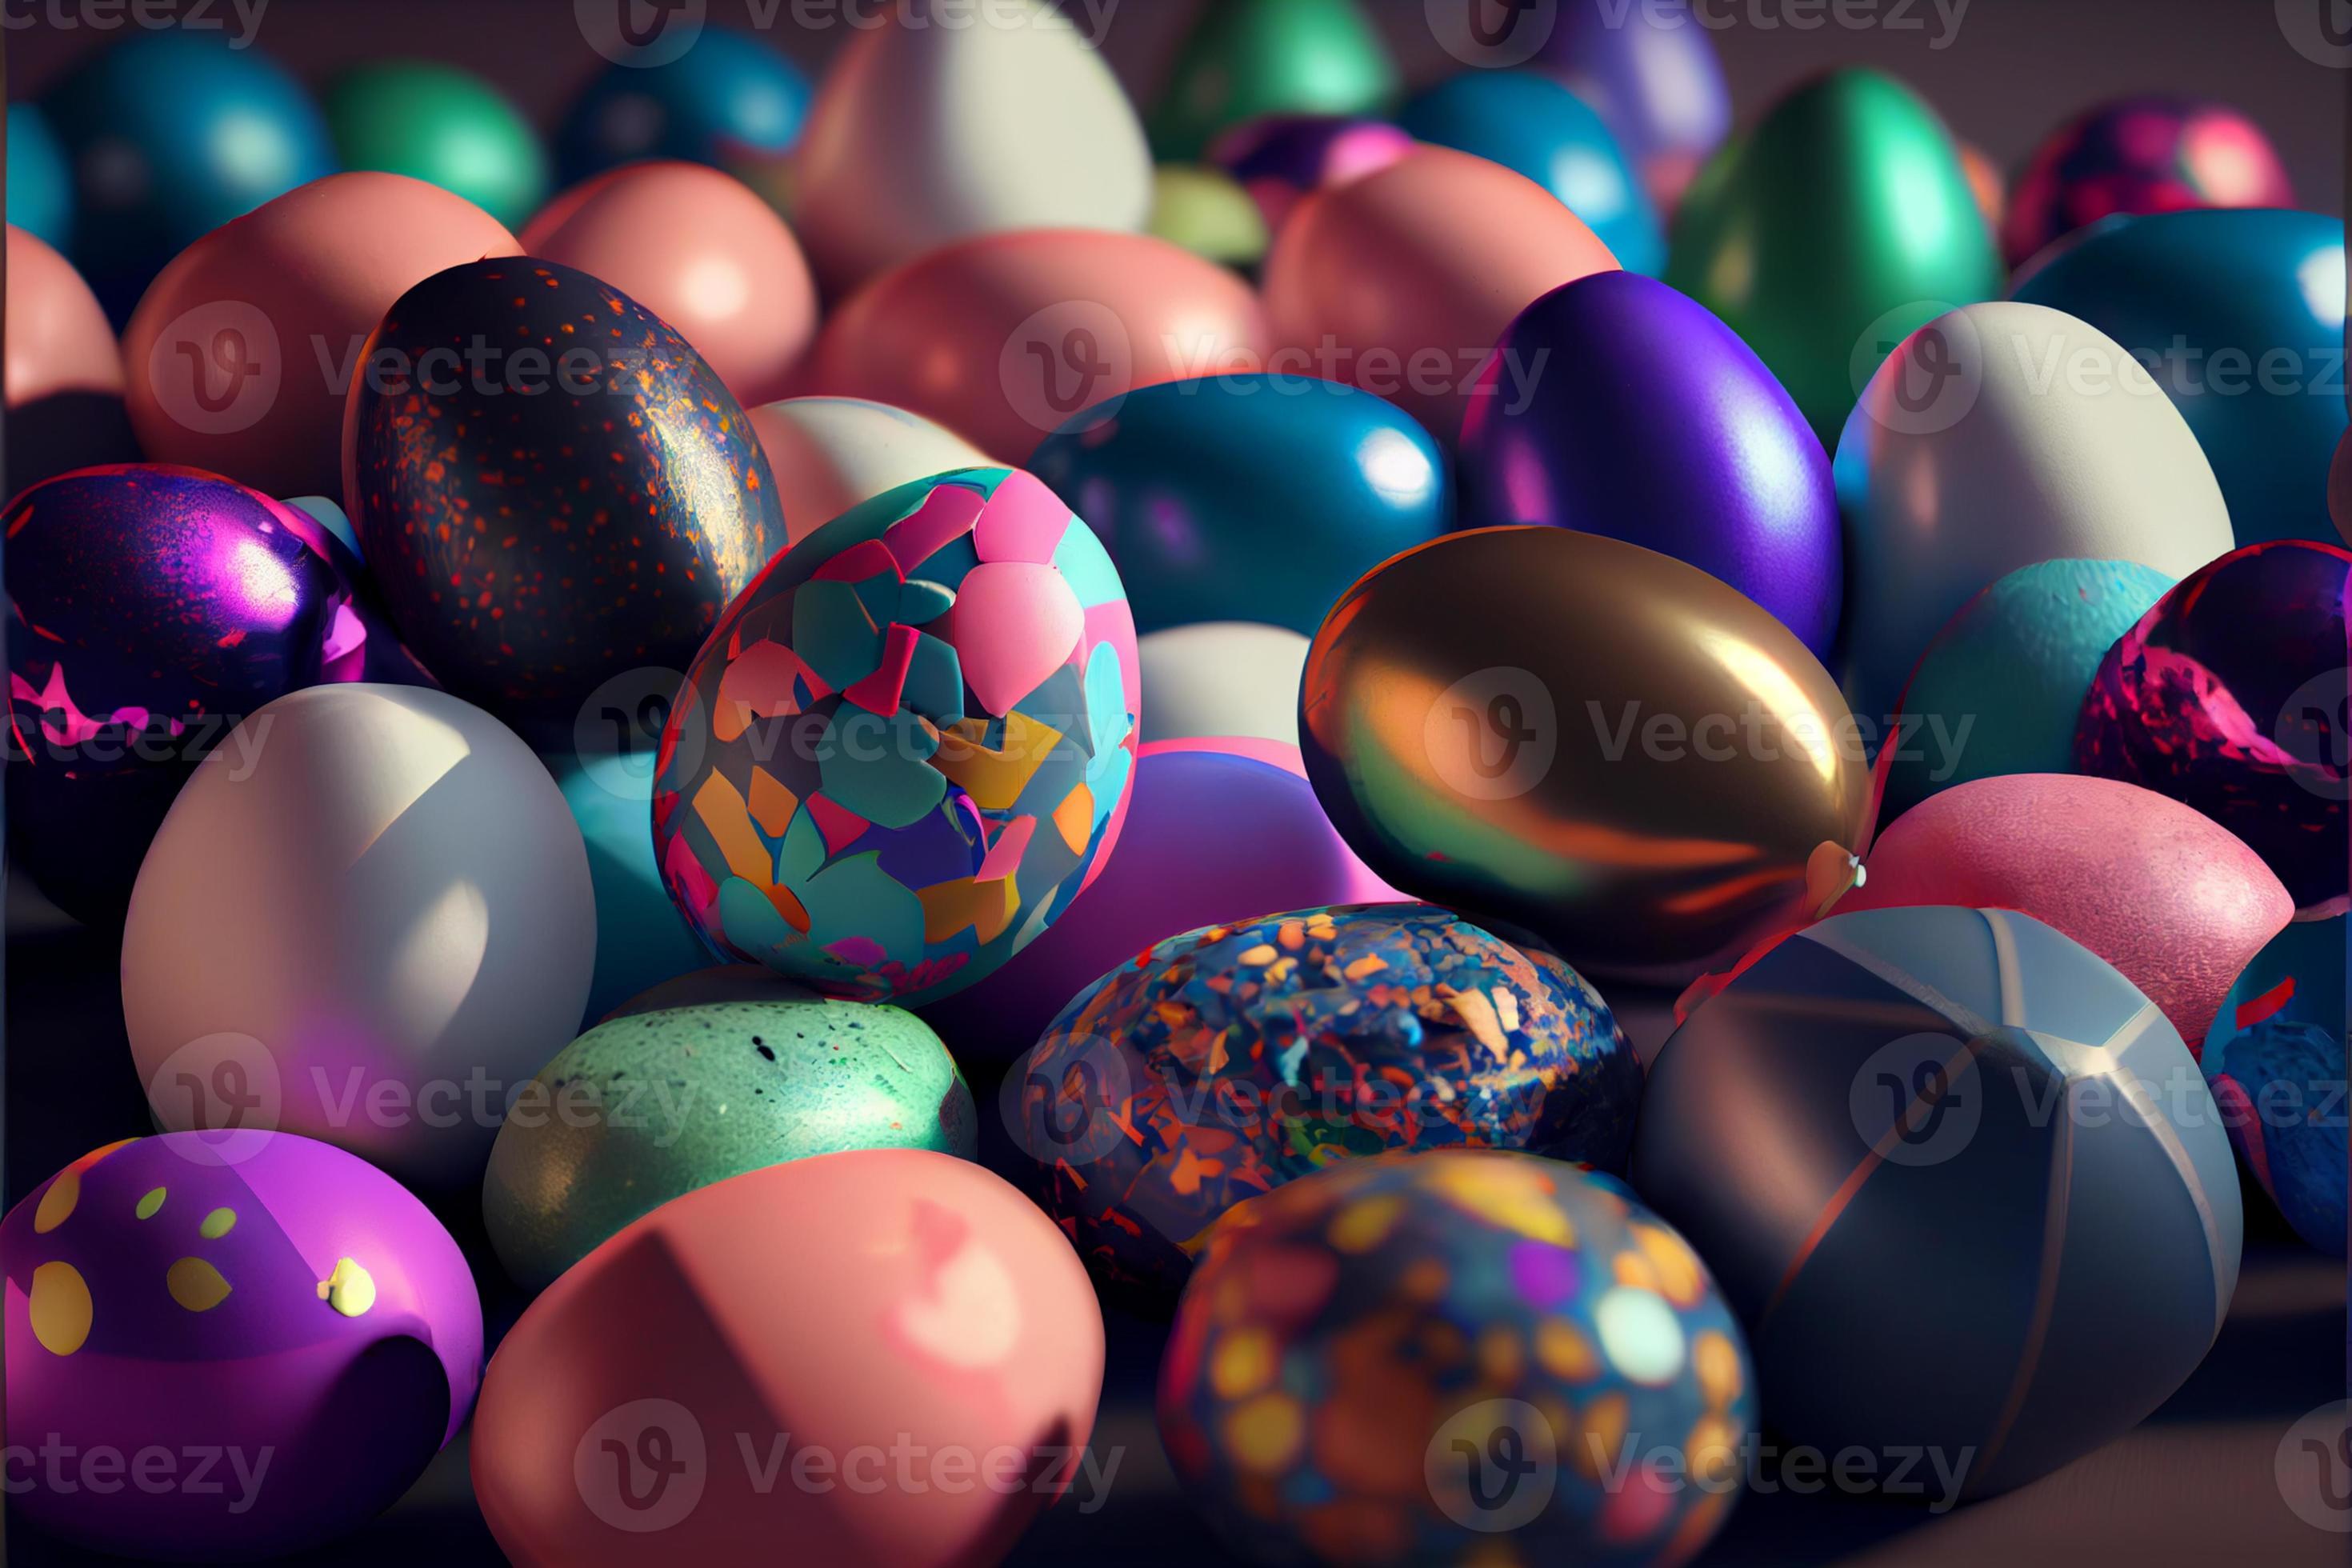 Easter, April 9, Christian Day To commemorate the resurrection of Jesus, a symbol of hope, rebirth and forgiveness, the Easter Egg Hunt decorates eggs with patterns and bright colors. 16703759 Stock Photo